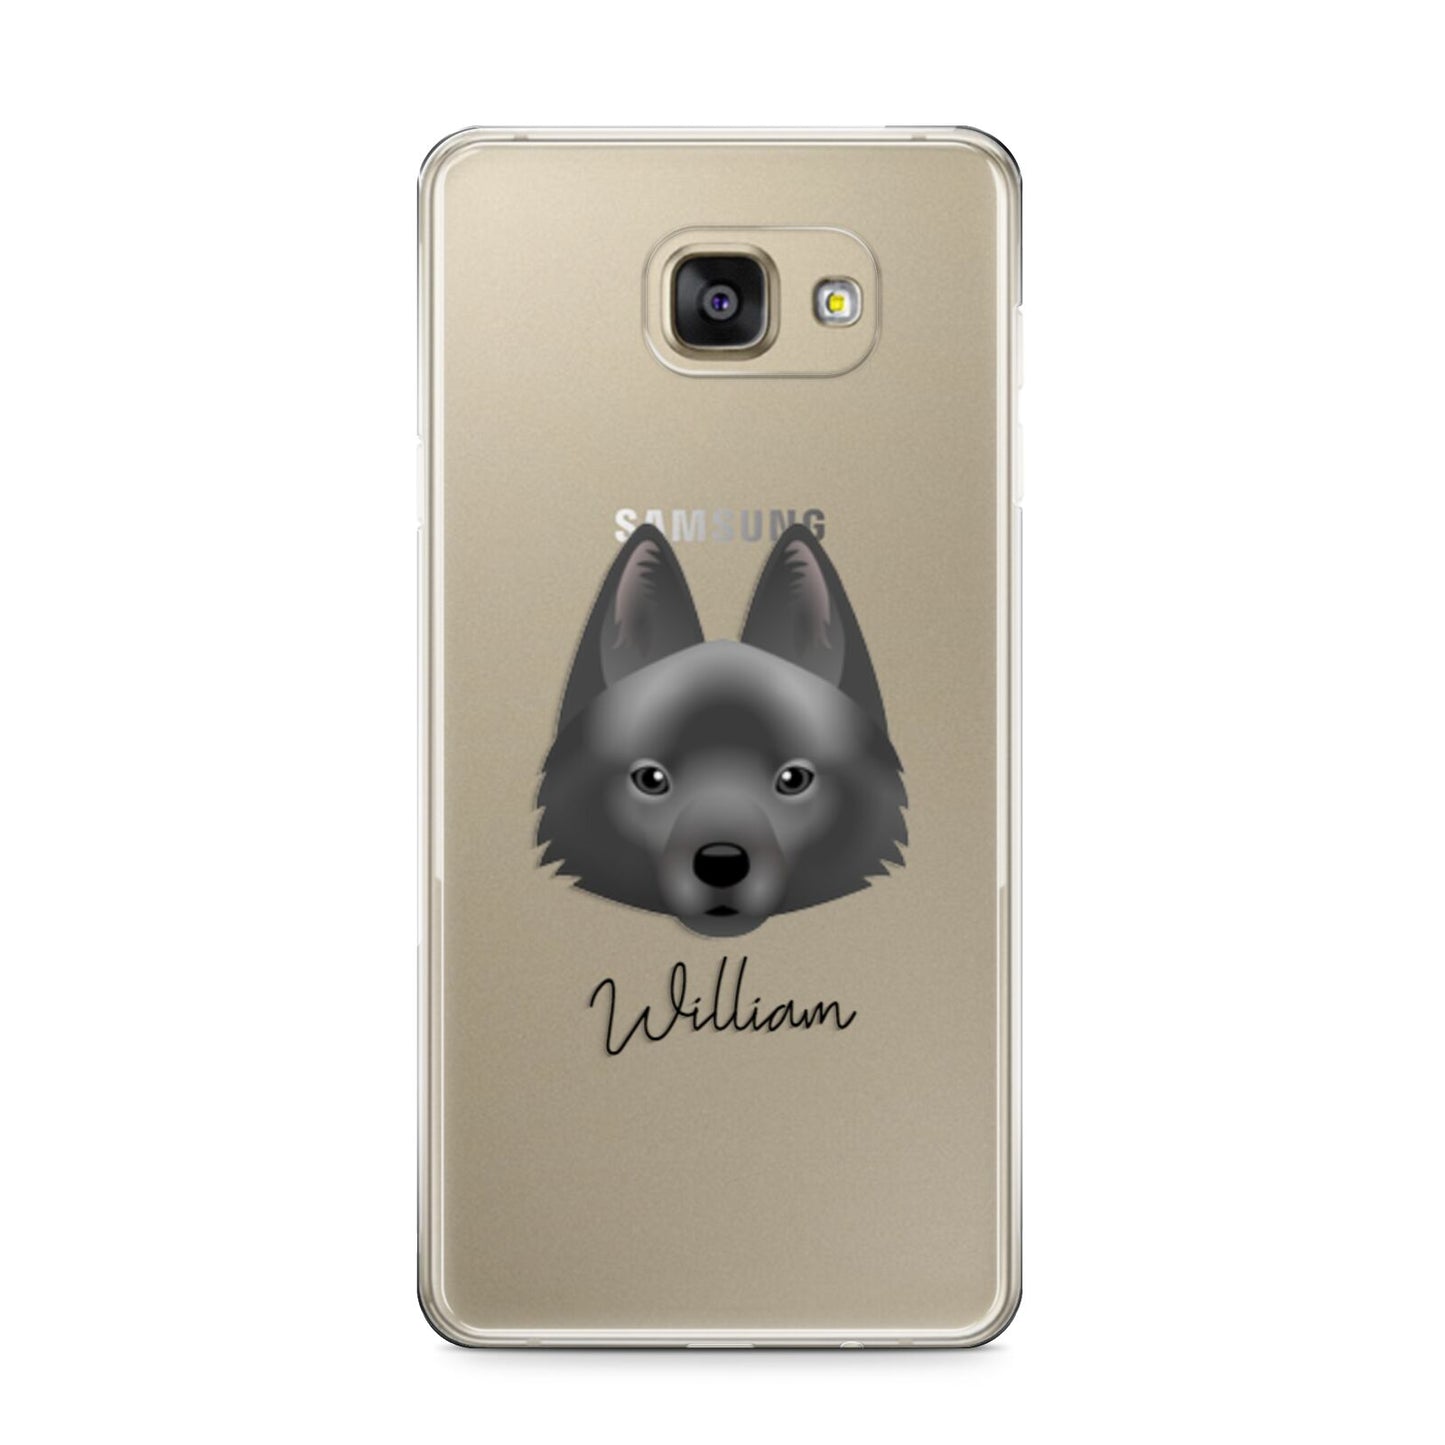 Schipperke Personalised Samsung Galaxy A9 2016 Case on gold phone